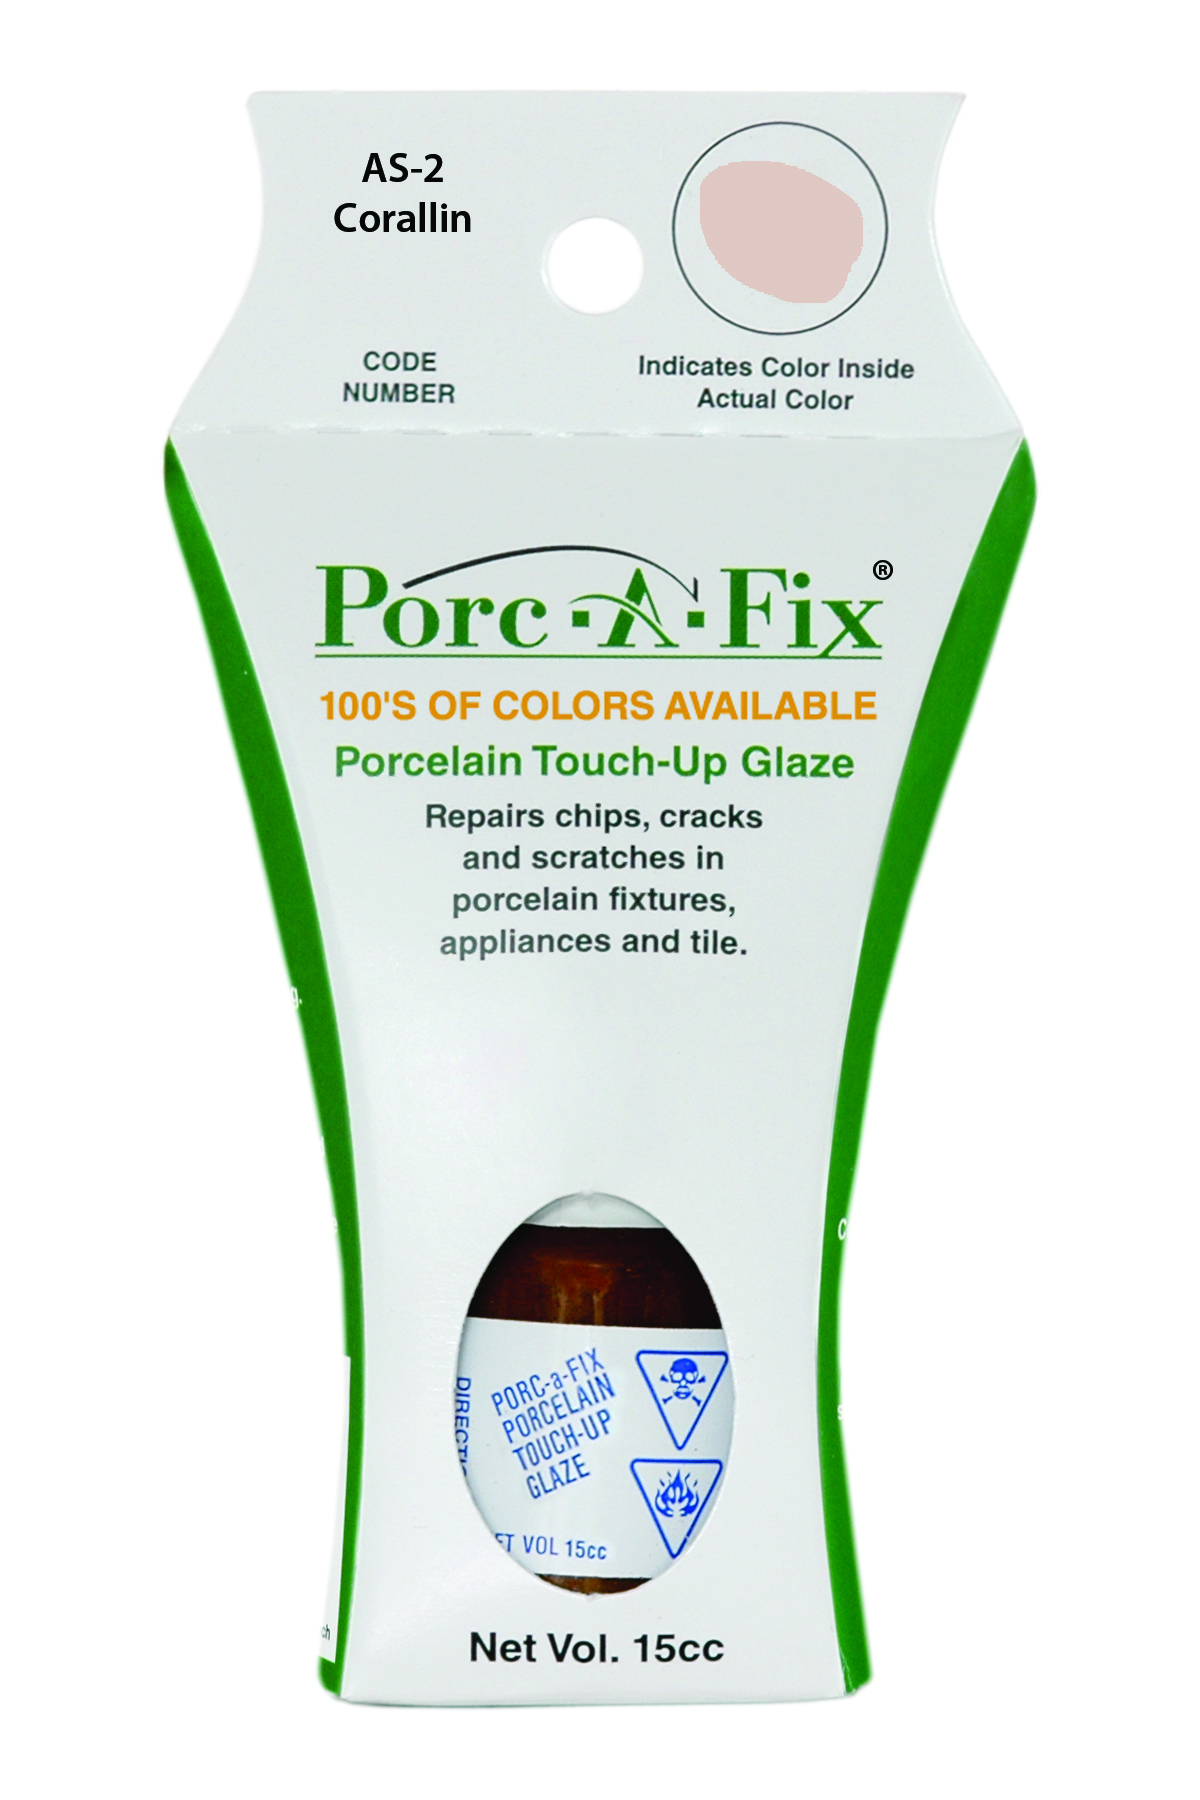 Fixture-Fix | AS-2 | Porc-A-Fix Touch-Up Glaze American Standard Corallin - Compatible with American Standard 070900-0320A Touch Up Paint Kit - CORALLIN